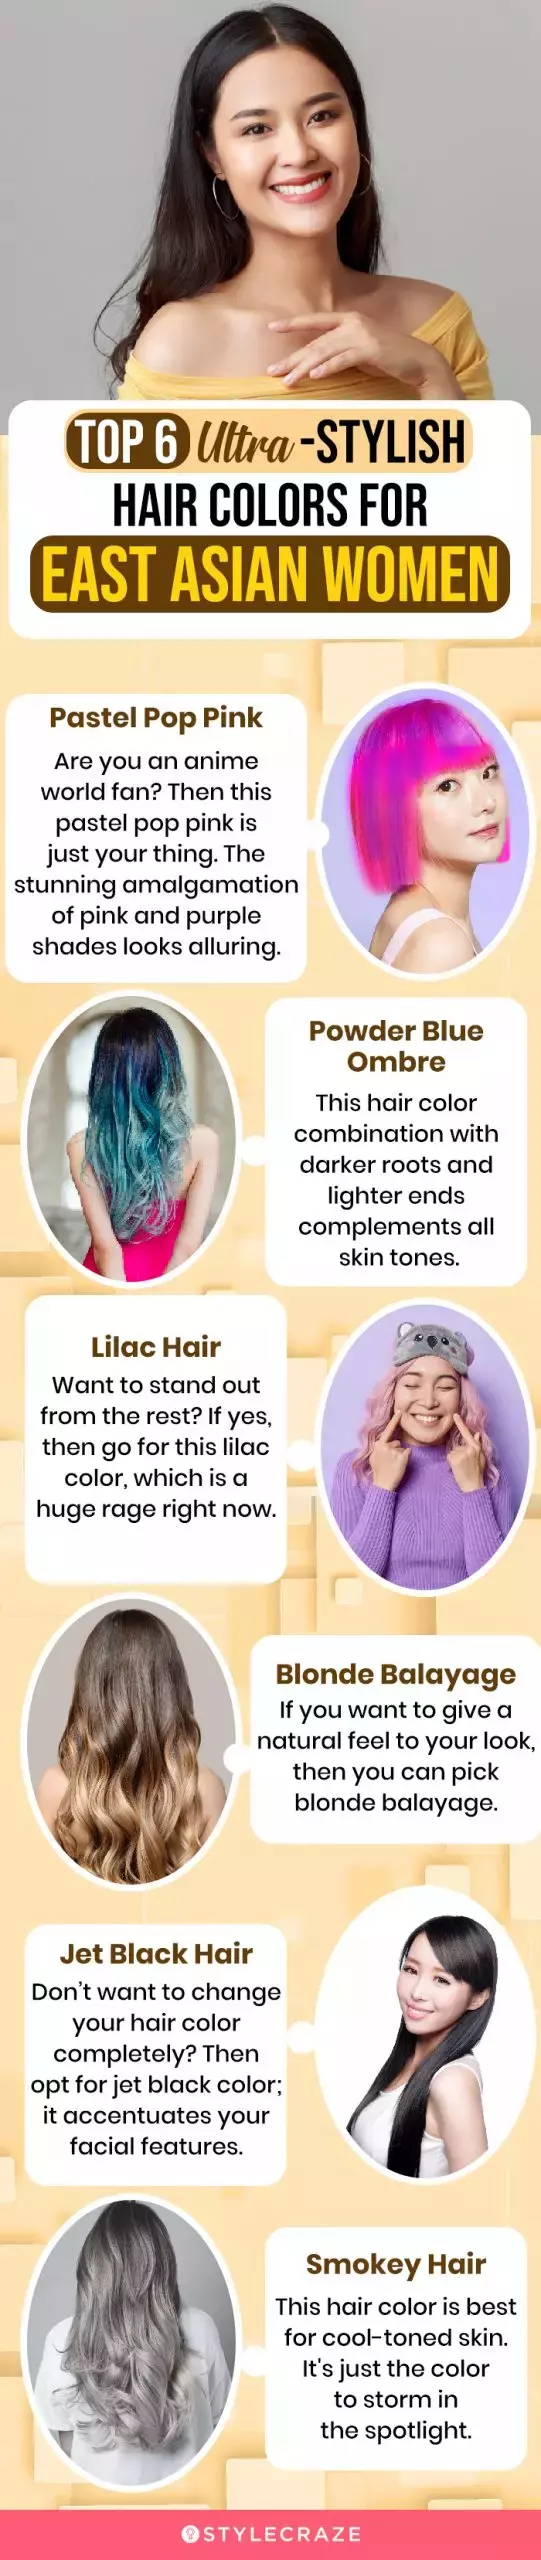 top 6 ultra stylish hair colors for east asian women (infographic)